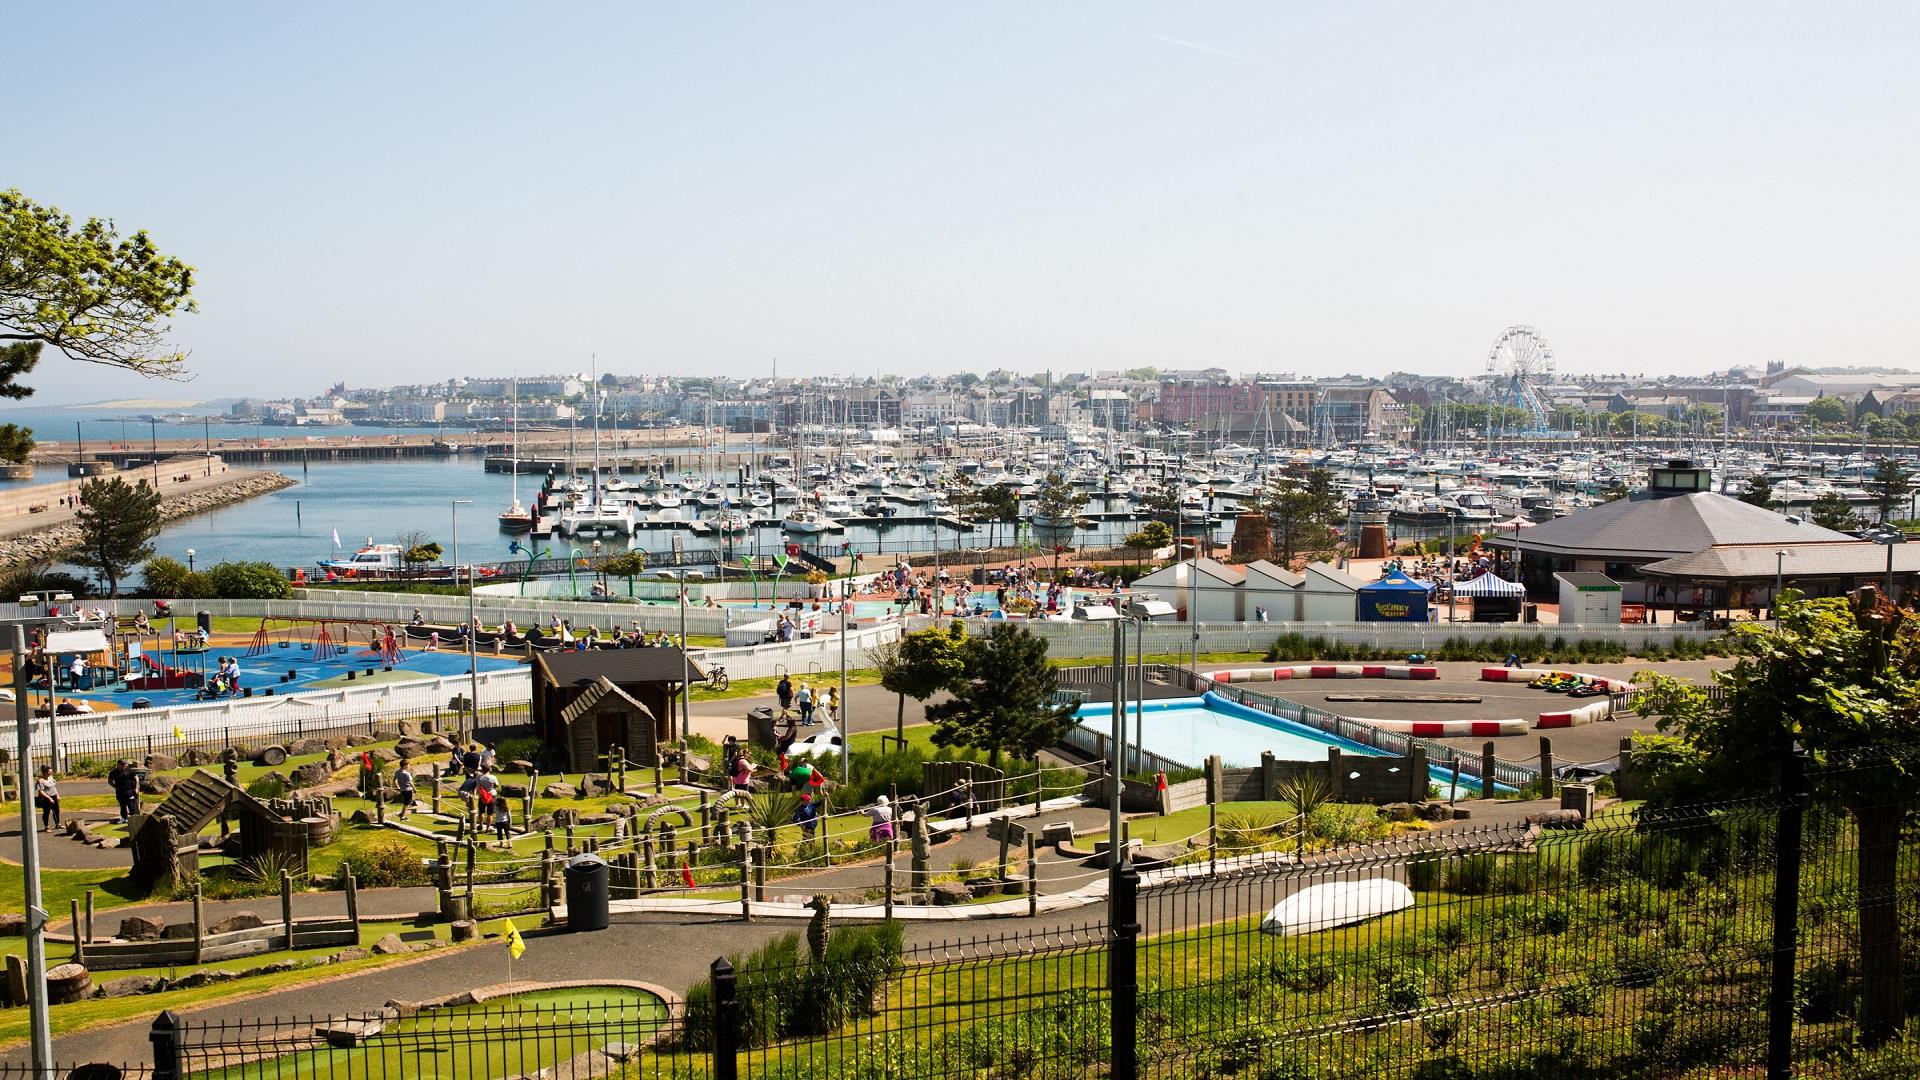 Photo taken on a summers day with a view over Pickie Funpark and the marina